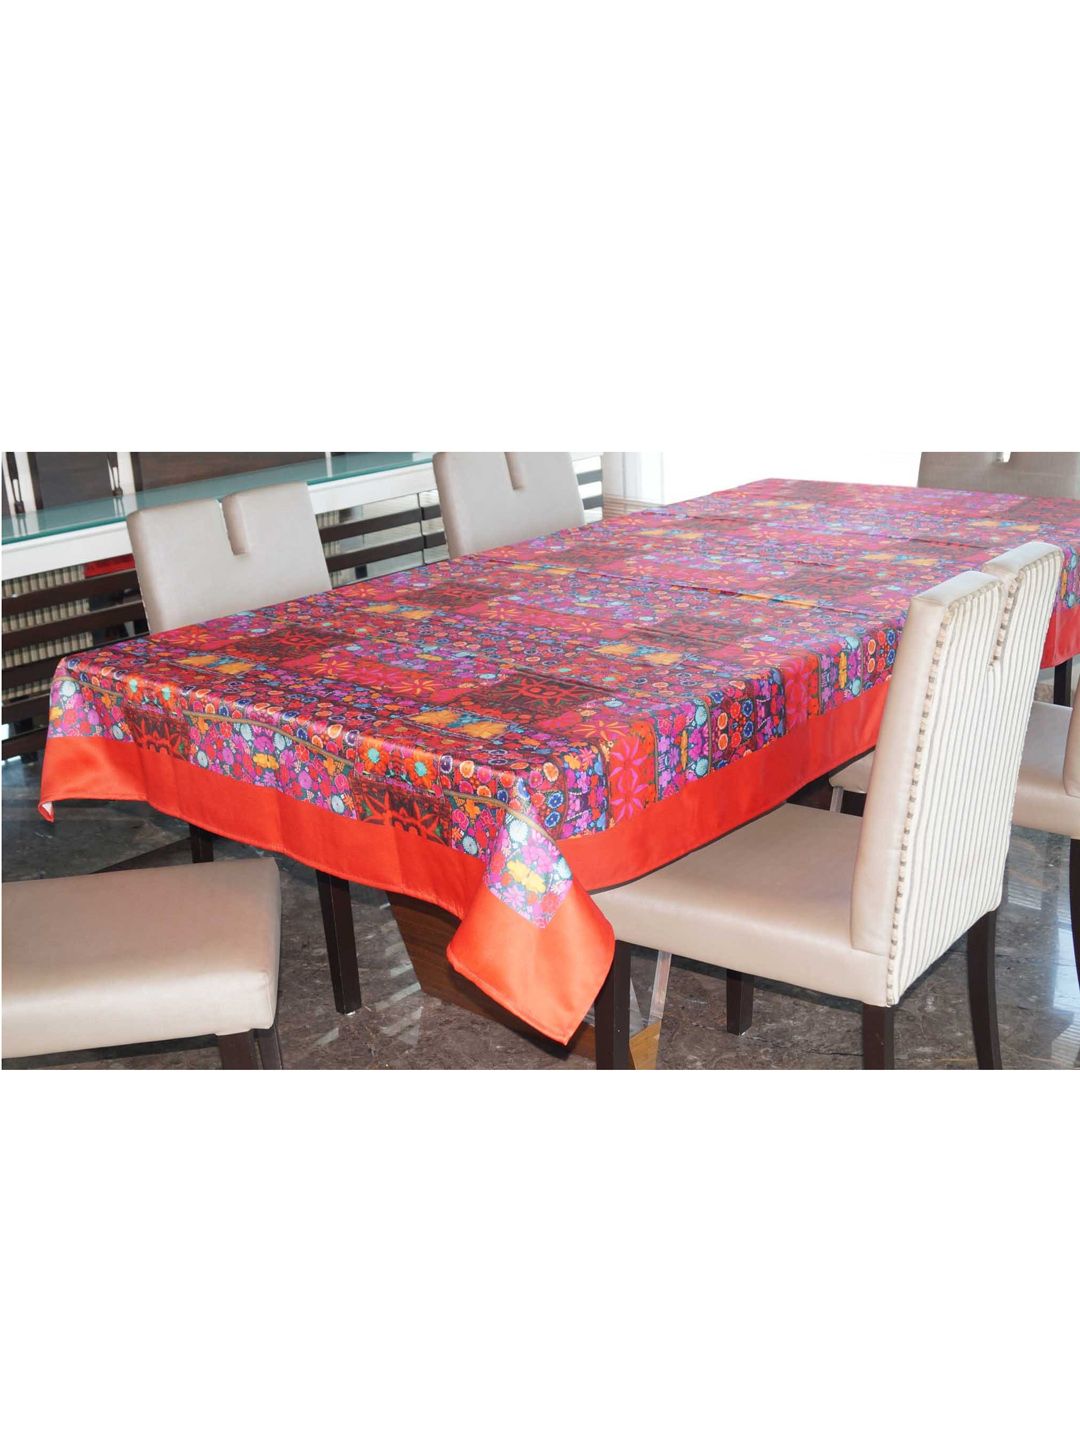 Lushomes Red & Pink Printed 6-Seater Table Cover Price in India